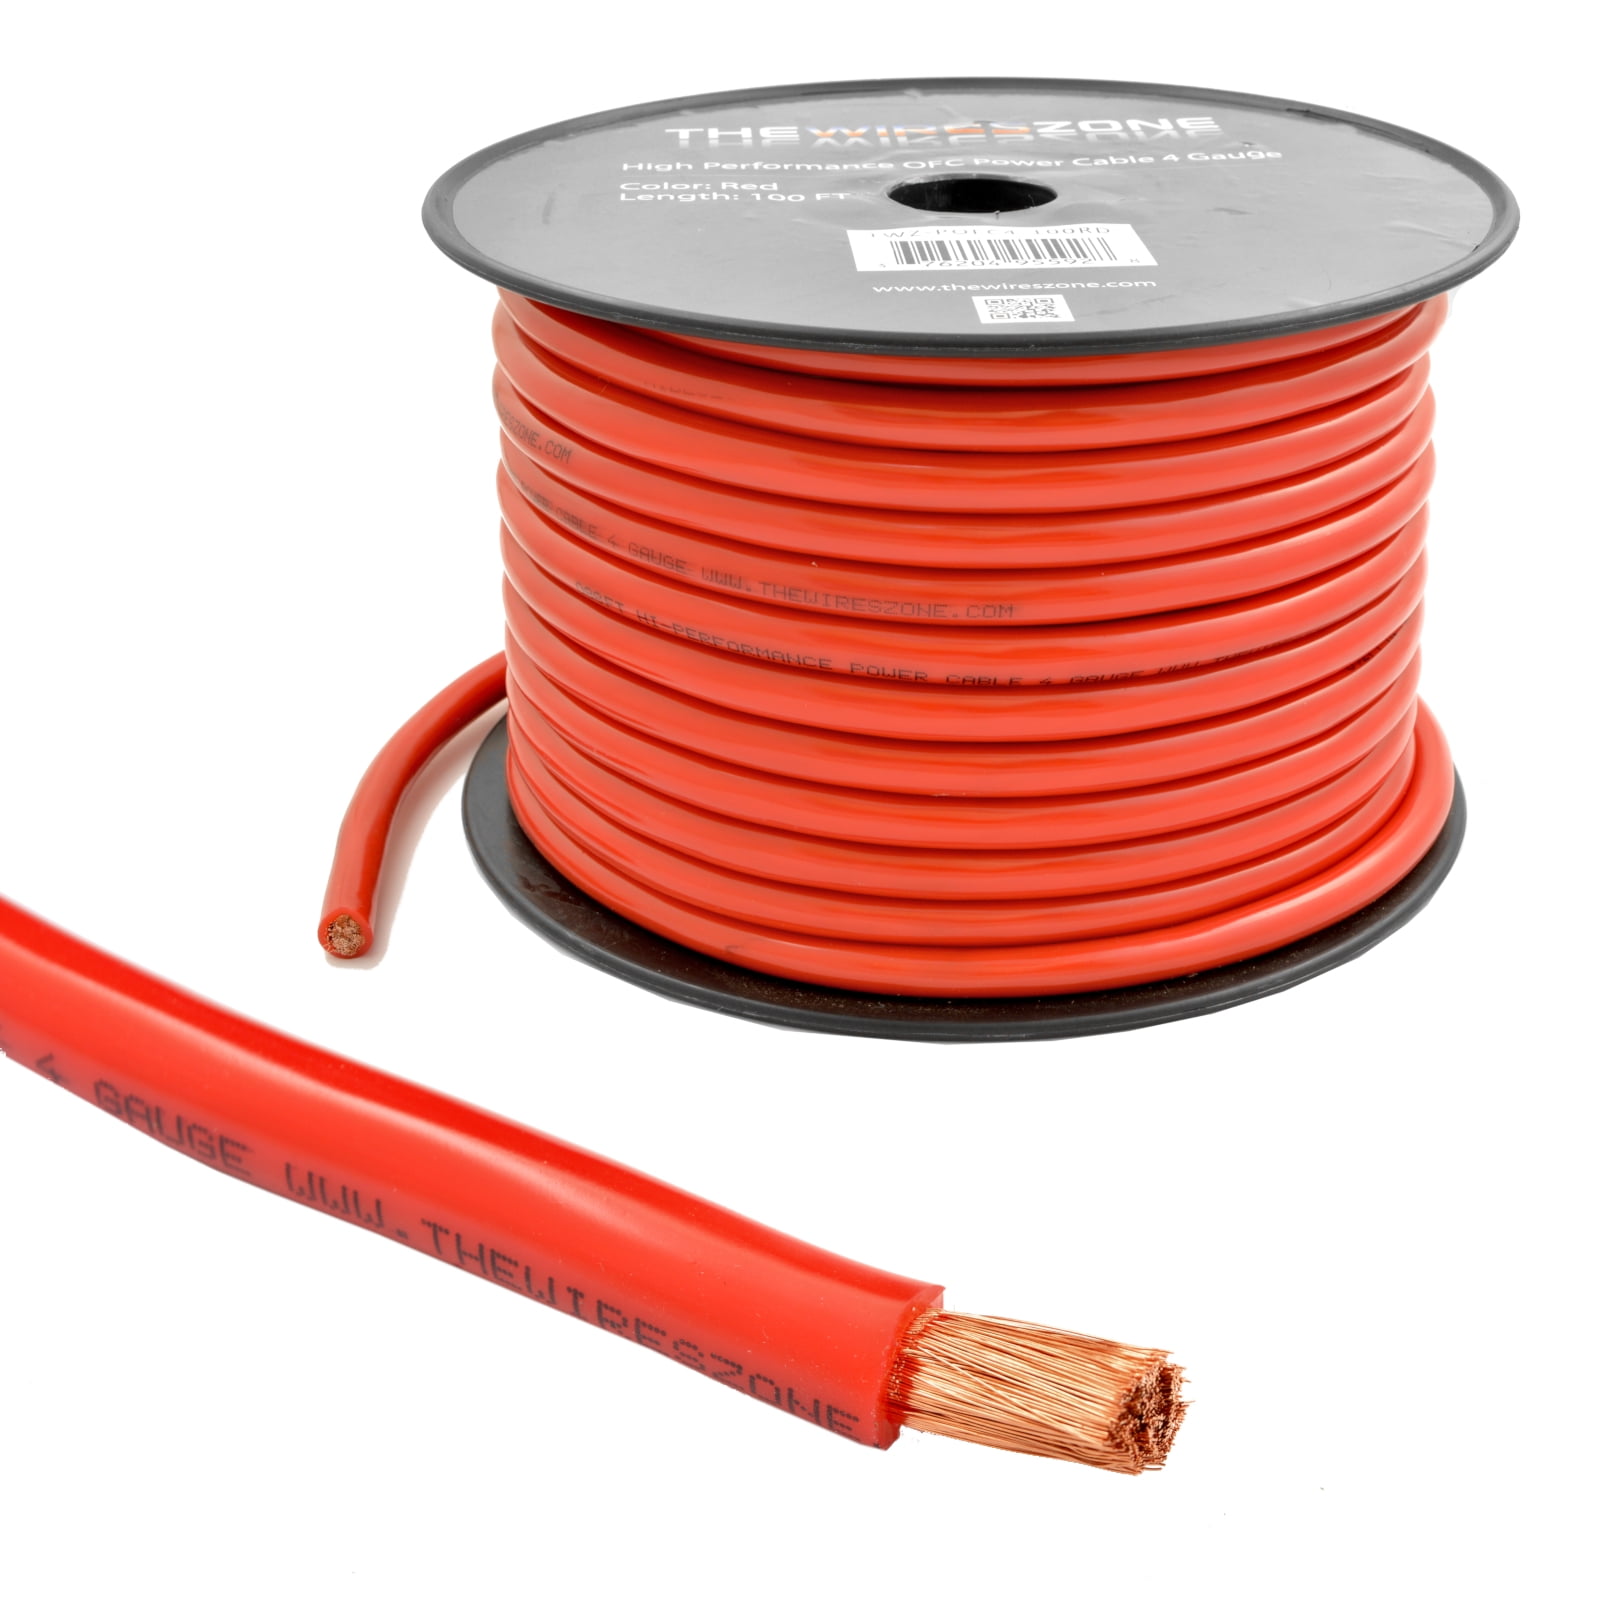 GearIT 10/3 10 AWG Portable Power Cable (50 Feet - 3 Conductor) SJOOW 300V 10 Gauge Electric Wire for Motor Leads, Portable Lights, Battery Chargers